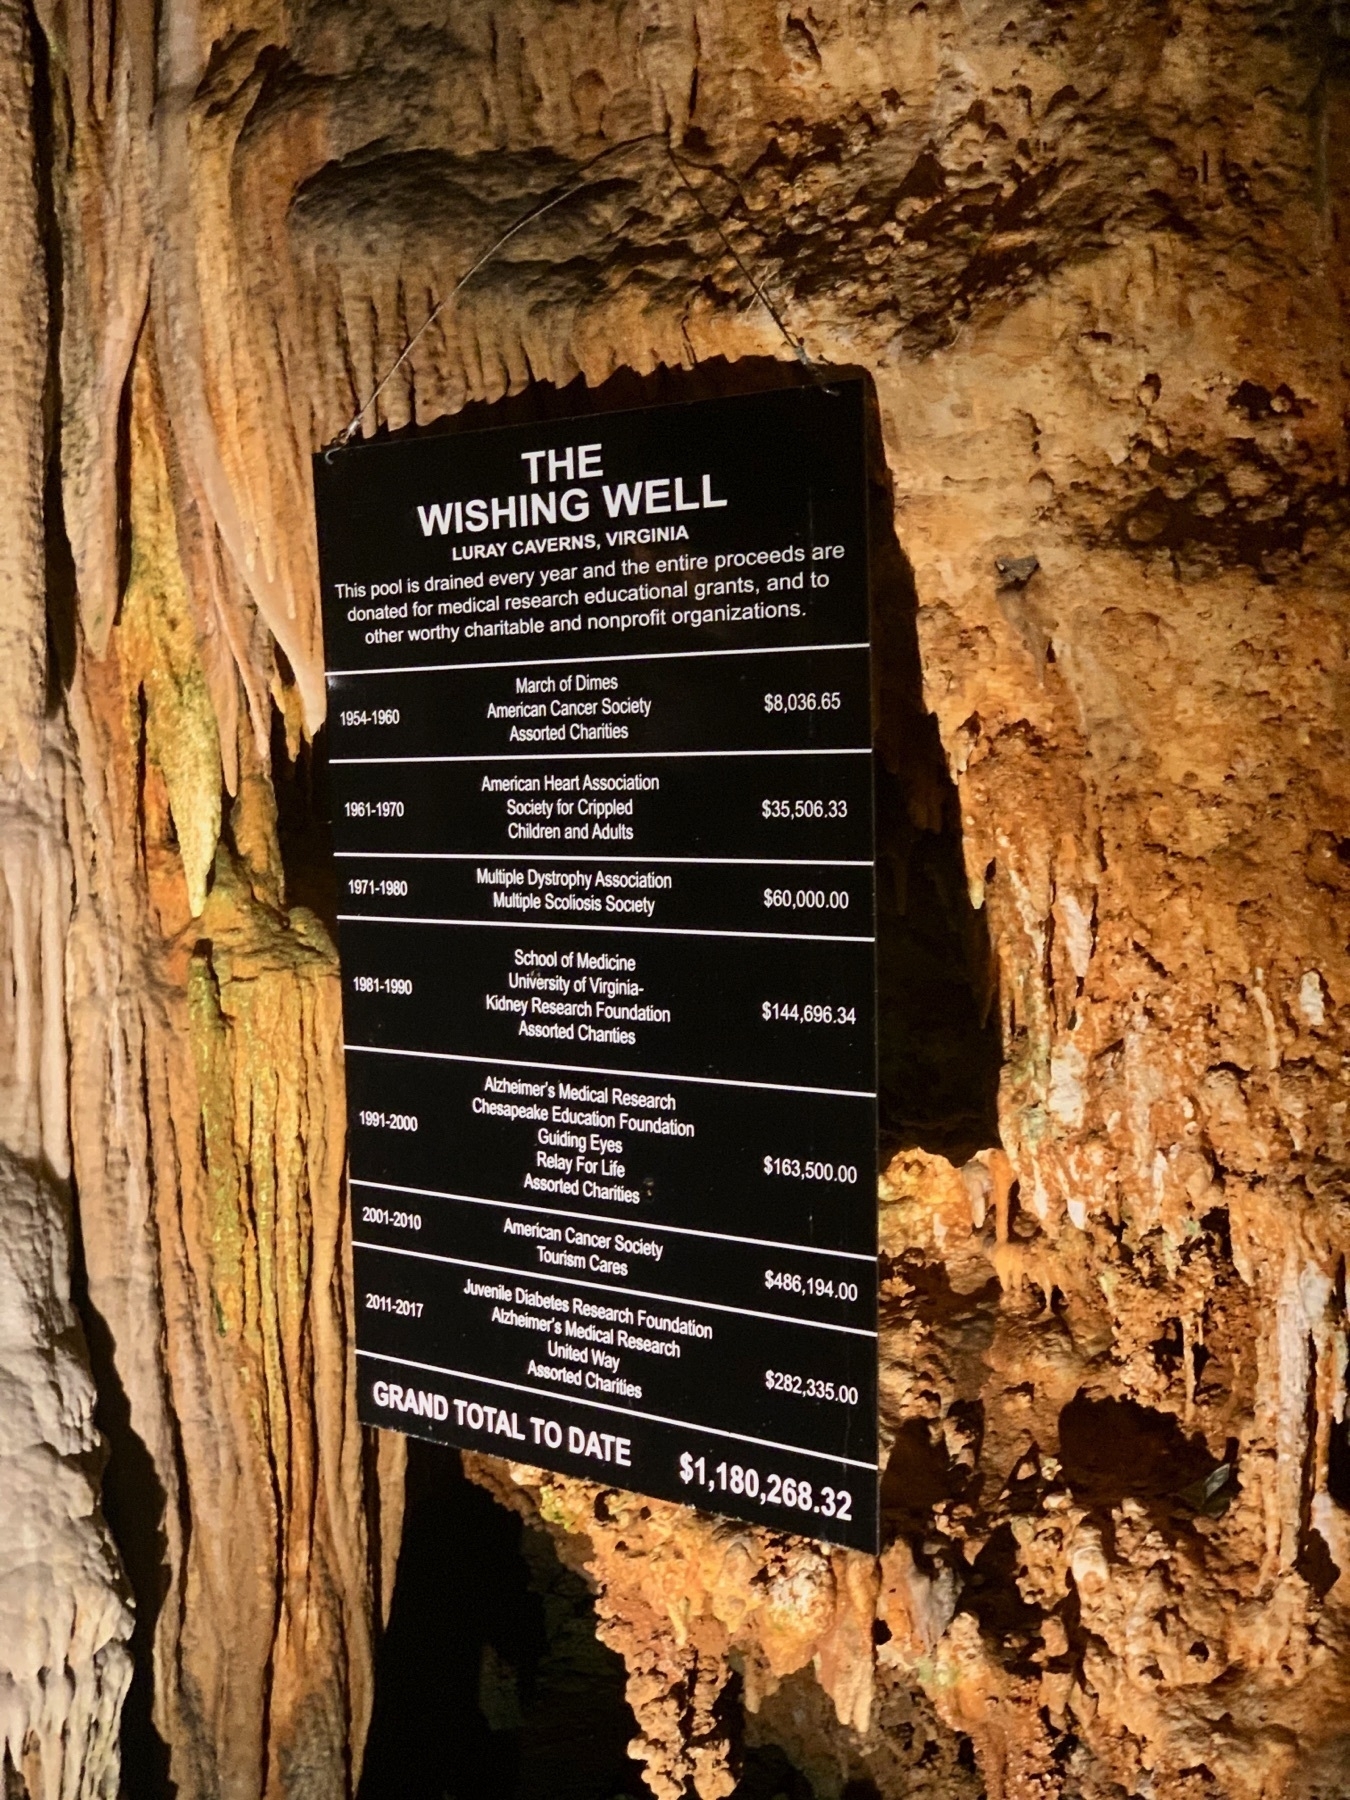 Photo of a plaque from the Luray Caverns, Virginia showing that $1,180,268.32 have been collected from the wishing pool from 1954–2017.